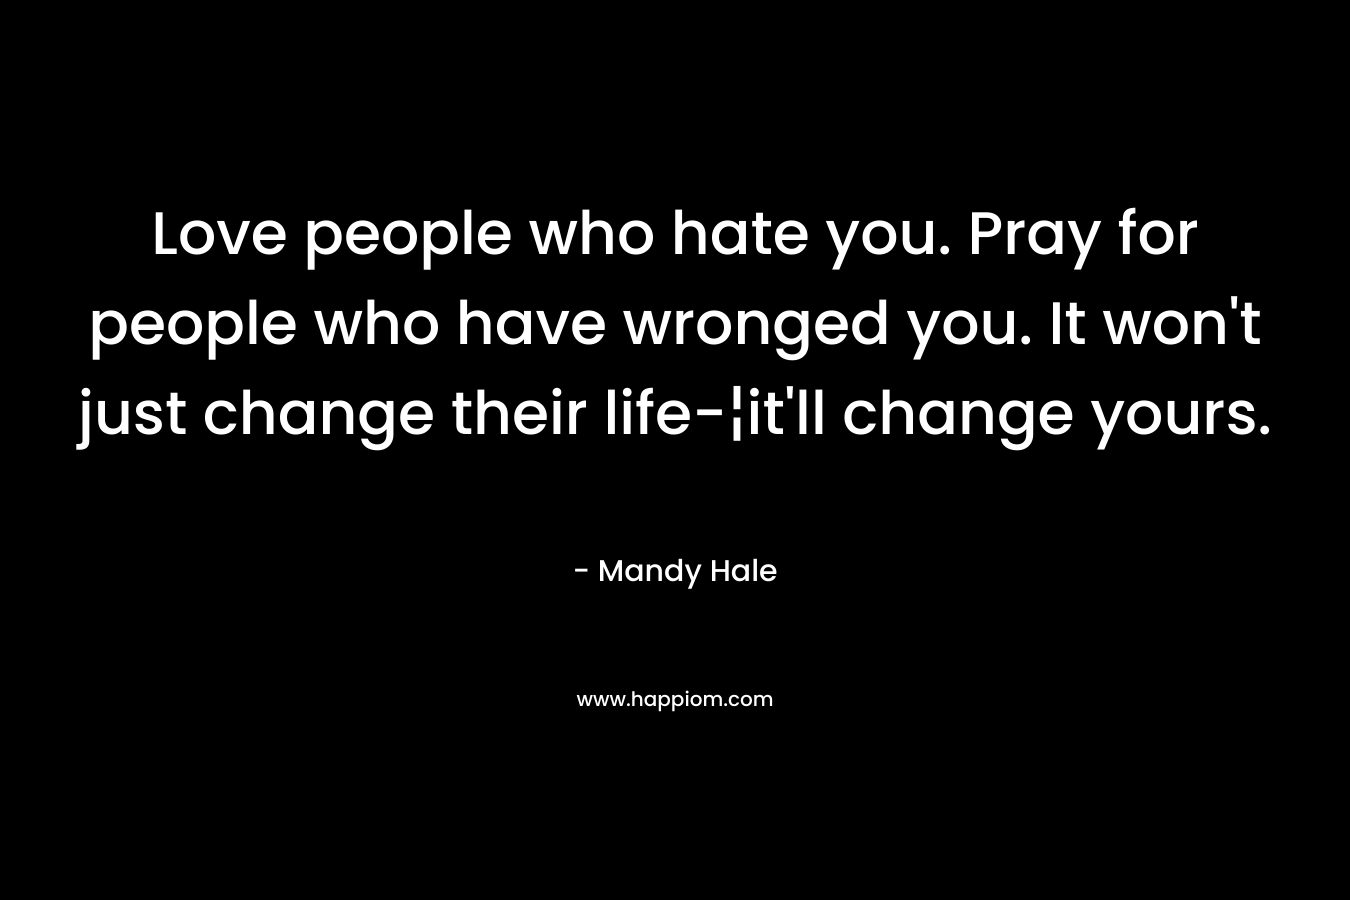 Love people who hate you. Pray for people who have wronged you. It won’t just change their life-¦it’ll change yours. – Mandy Hale